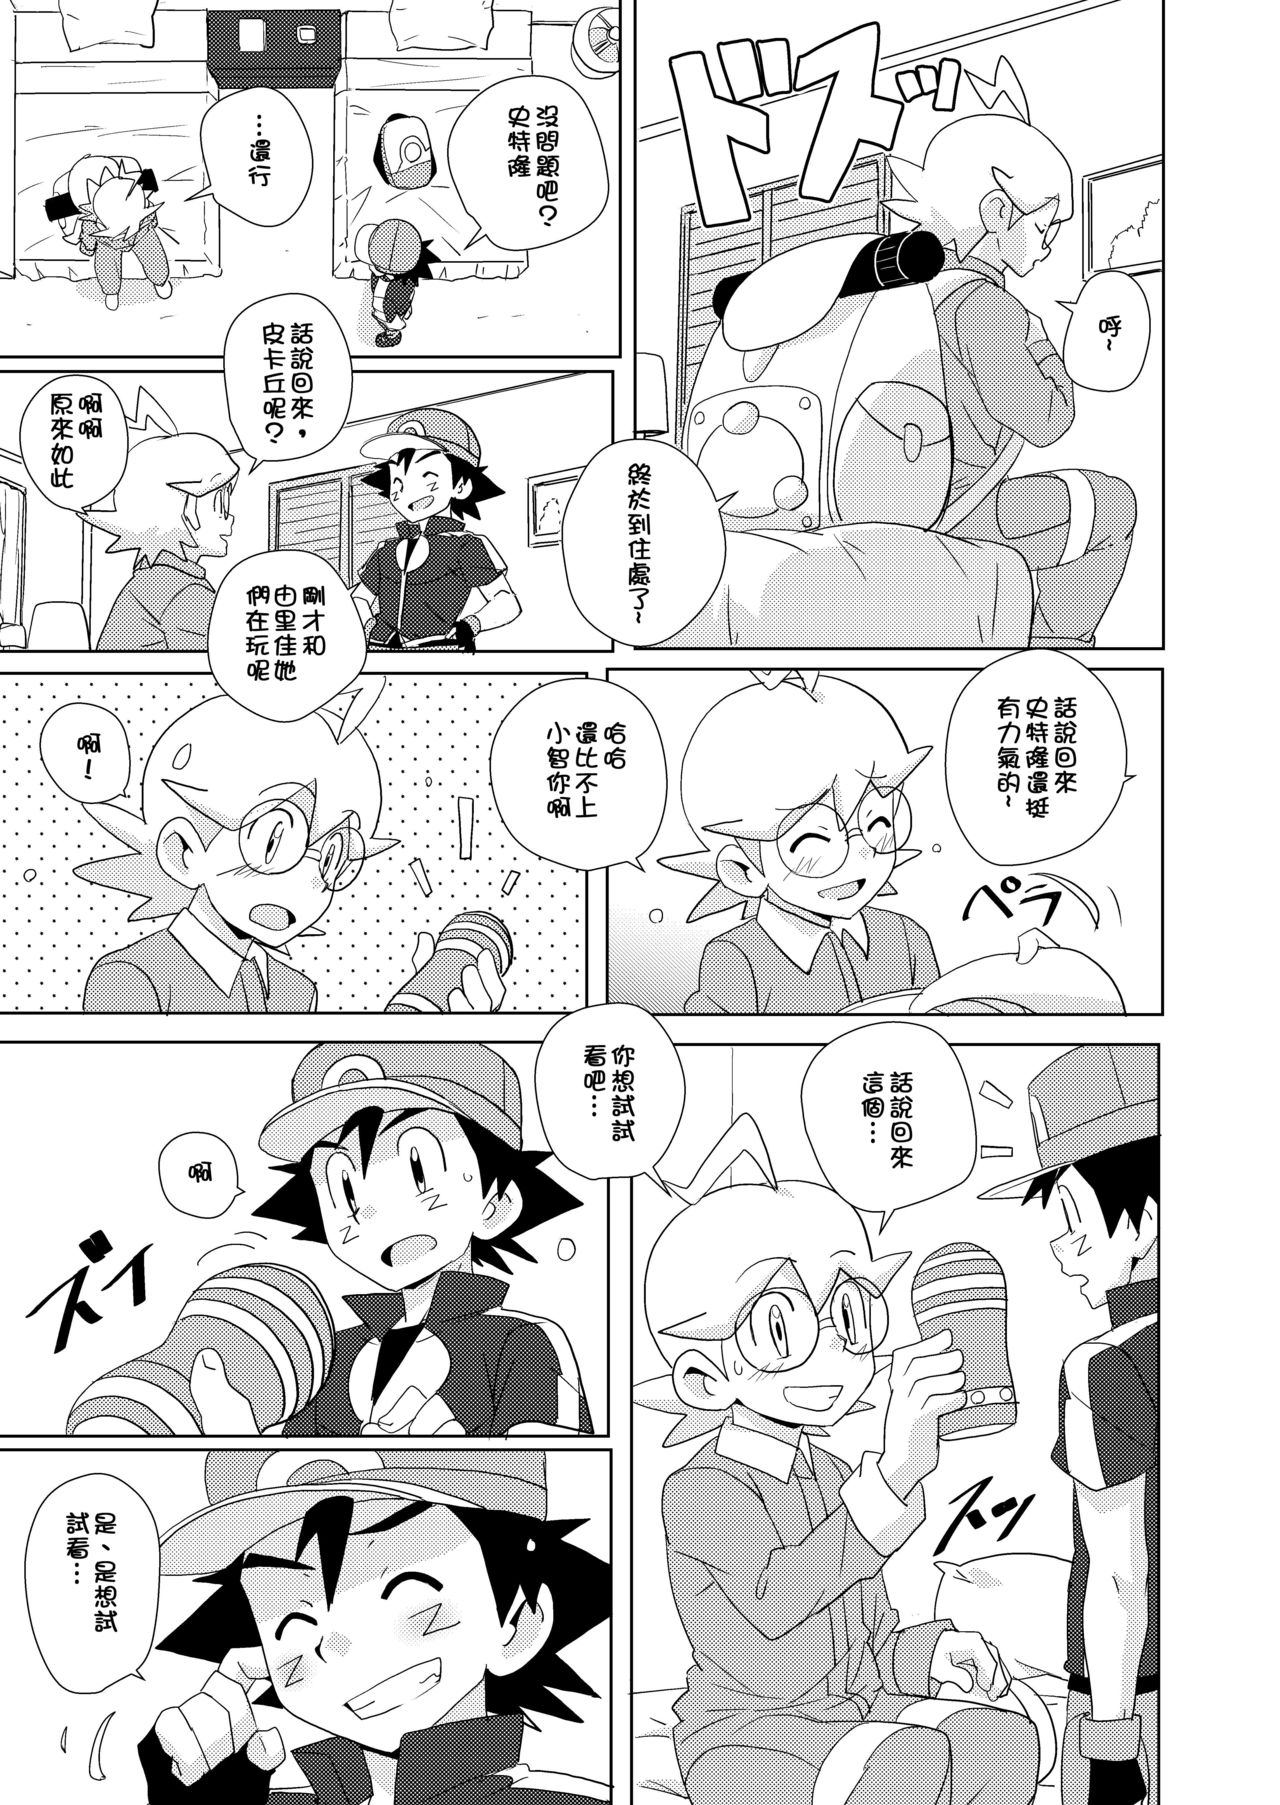 (Shota Scratch 27) [WEST ONE (10nin)] revolution 10 (Pokémon X and Y)  [Chinese] page 4 full